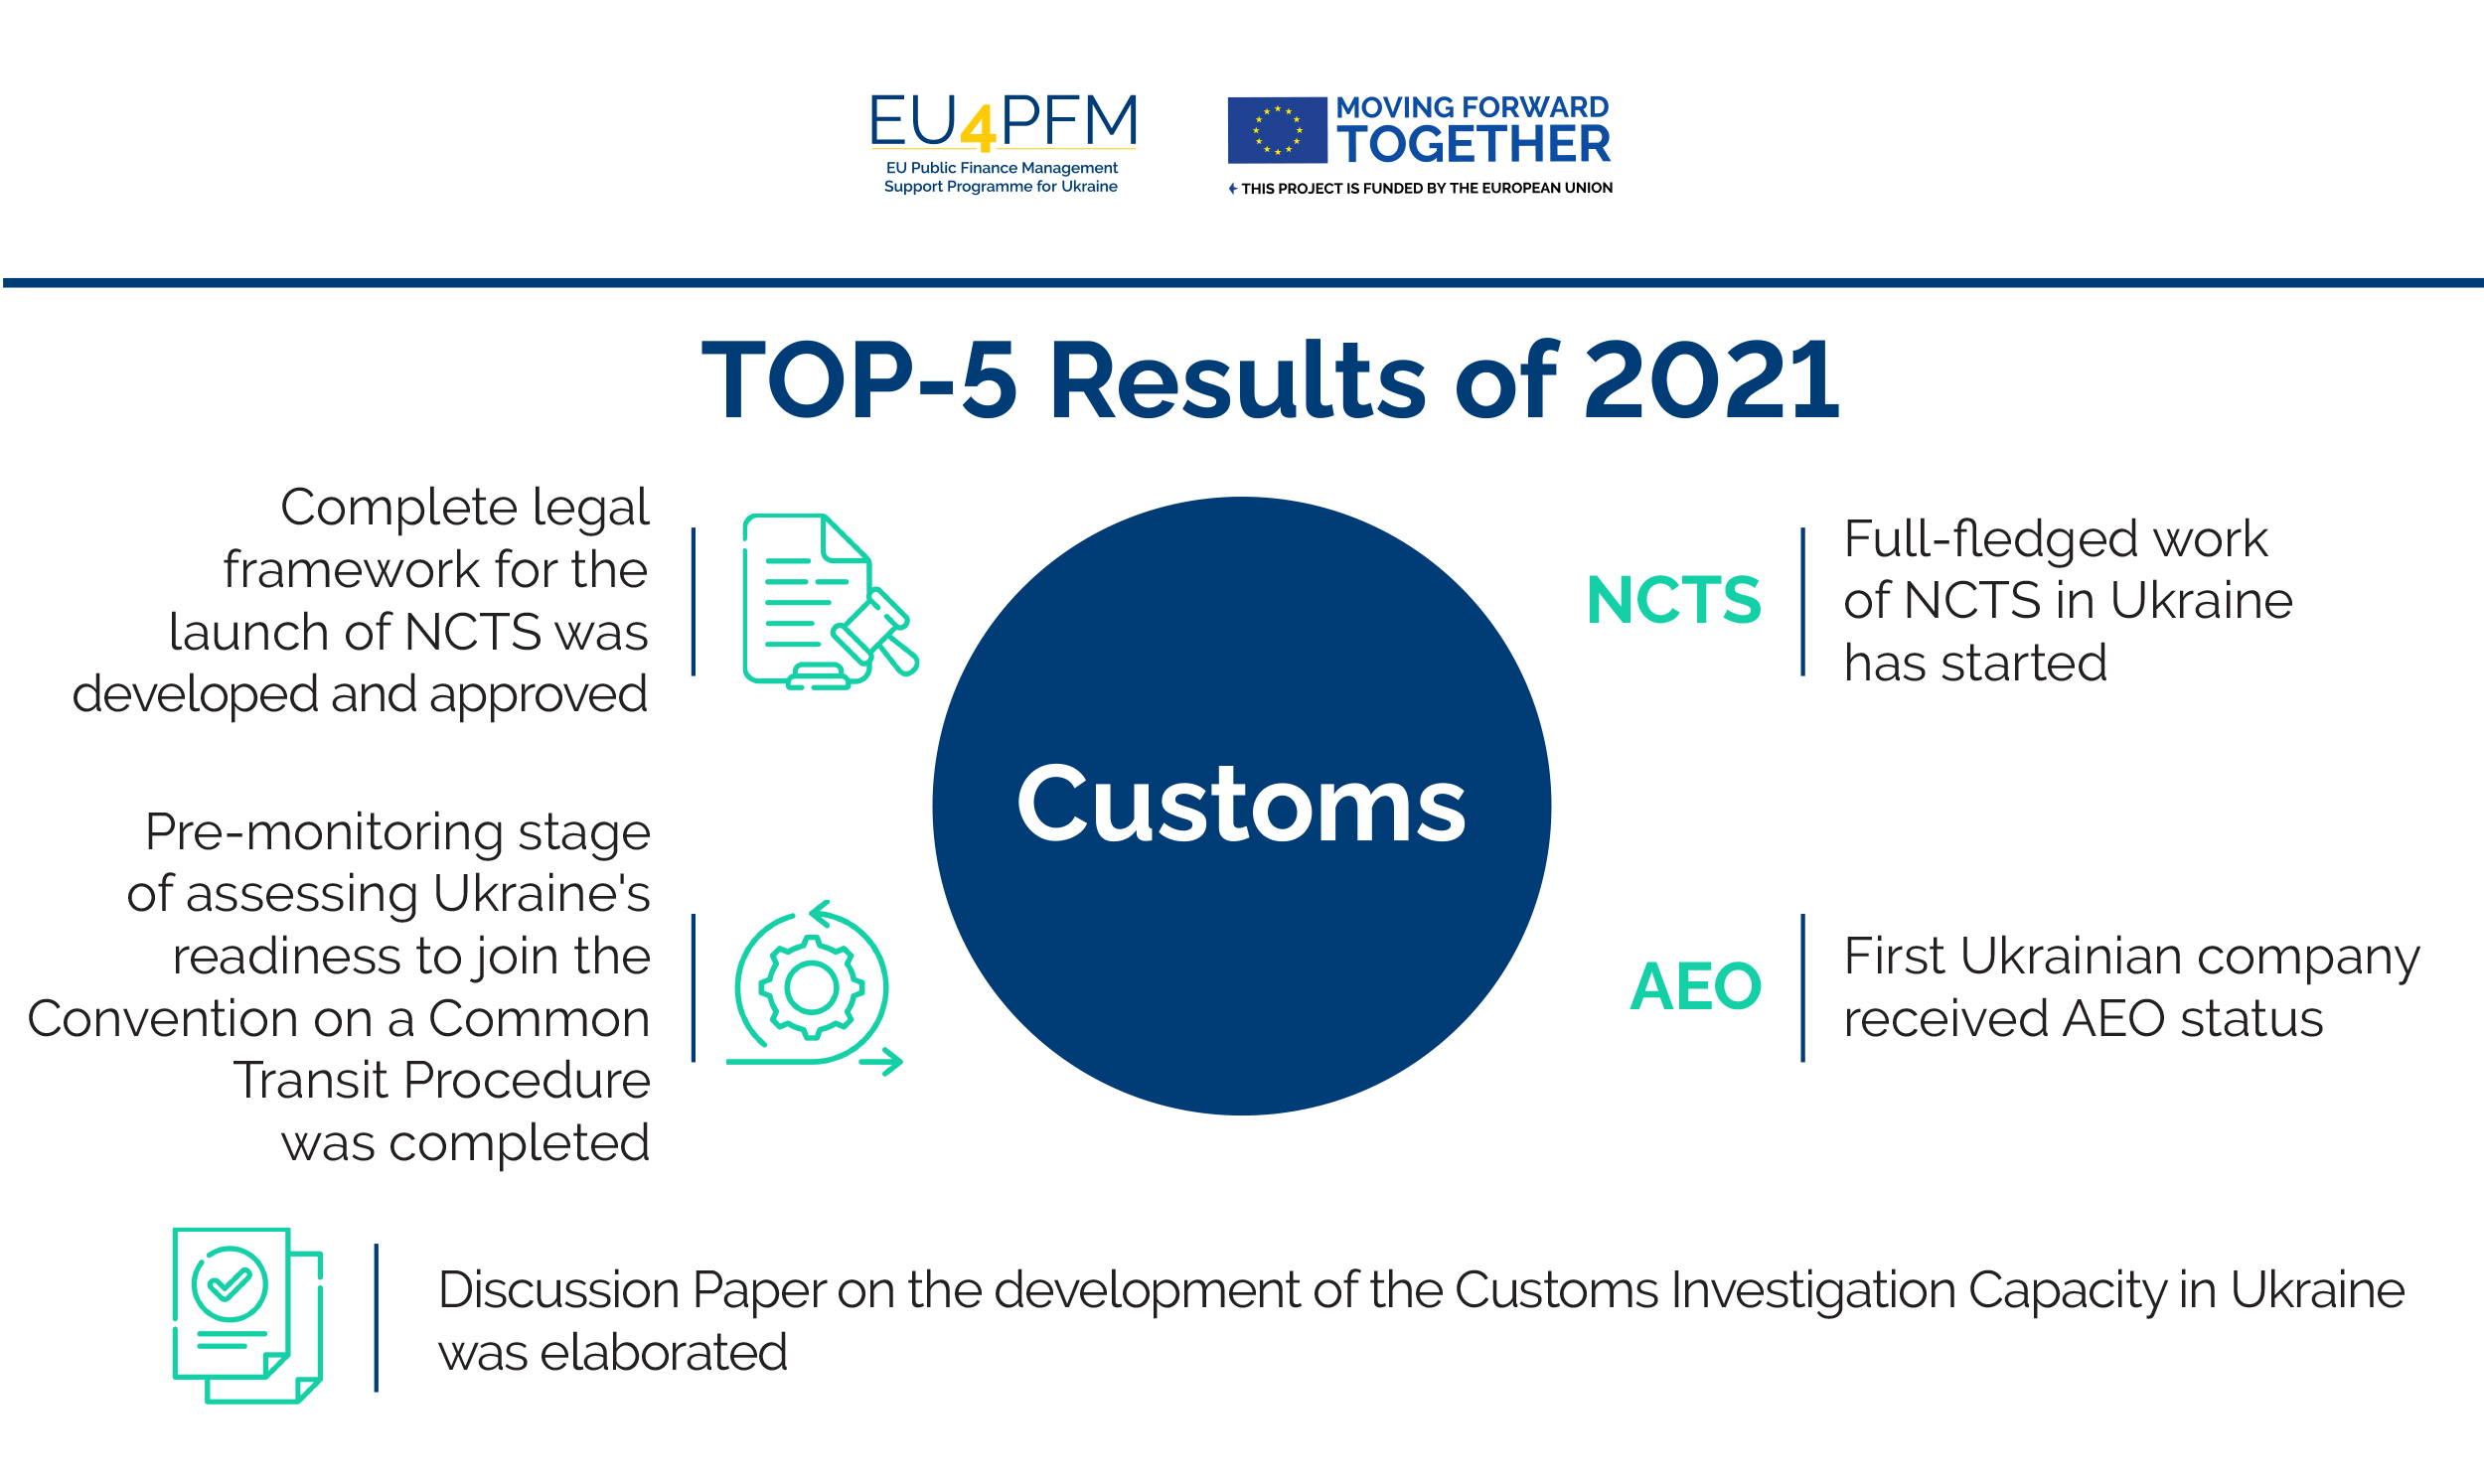 Results 2021: TOP-5 Achievements in Customs Area